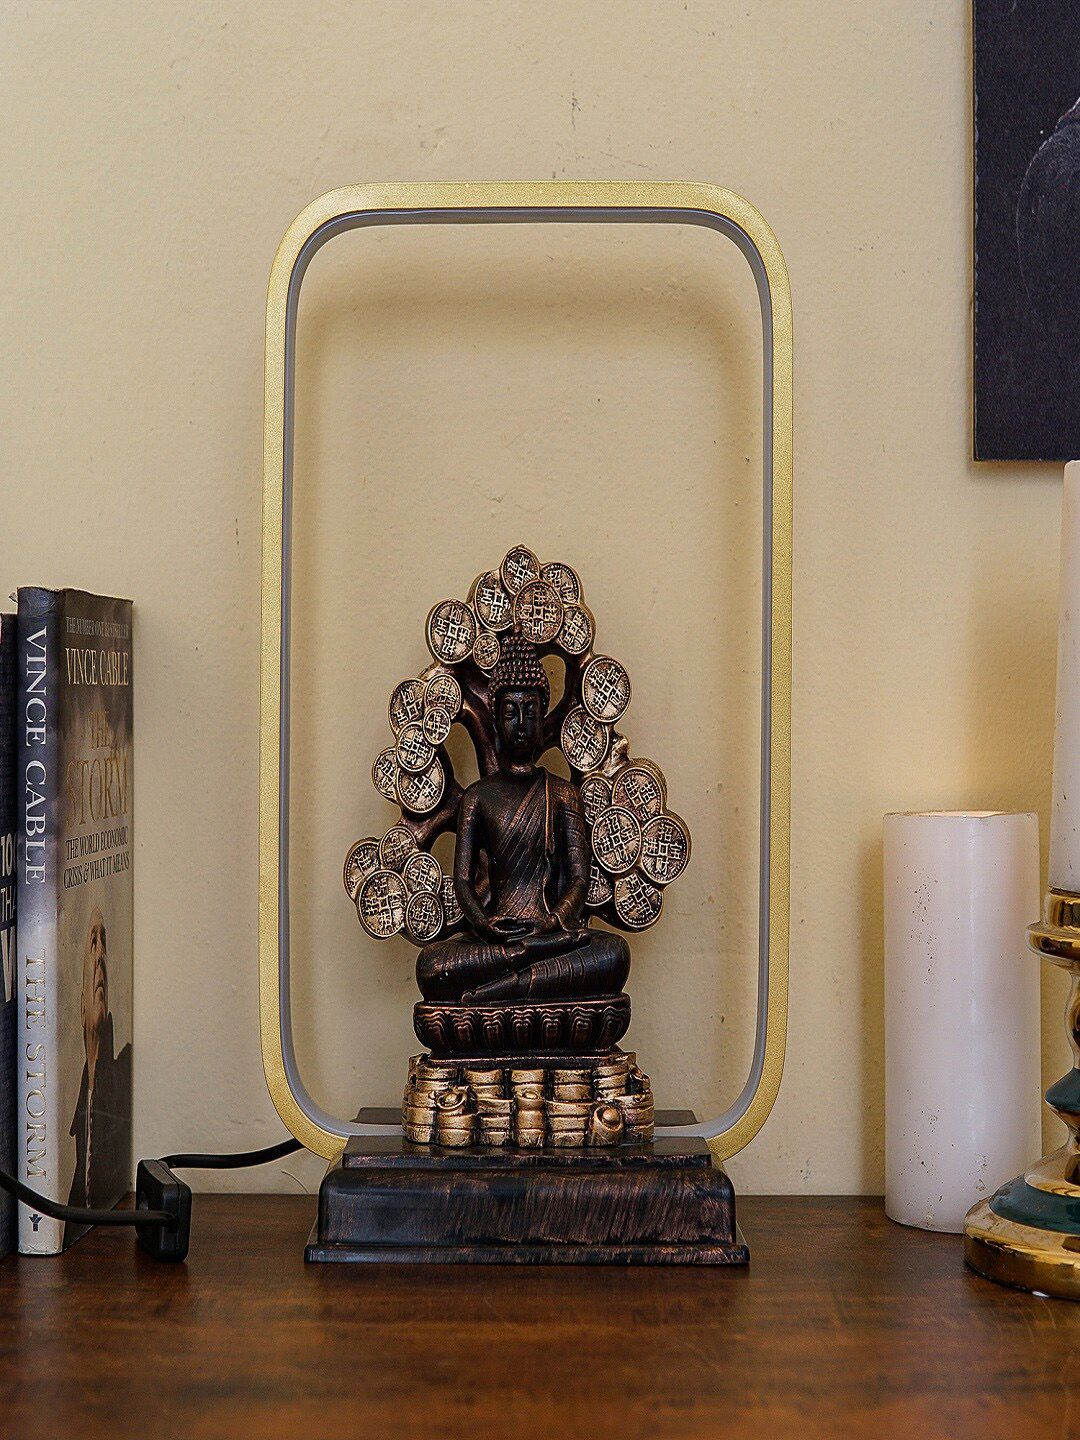 StatueStudio Black & Gold-Toned Buddha Tree Idol With Led Frame Statue Showpieces Price in India